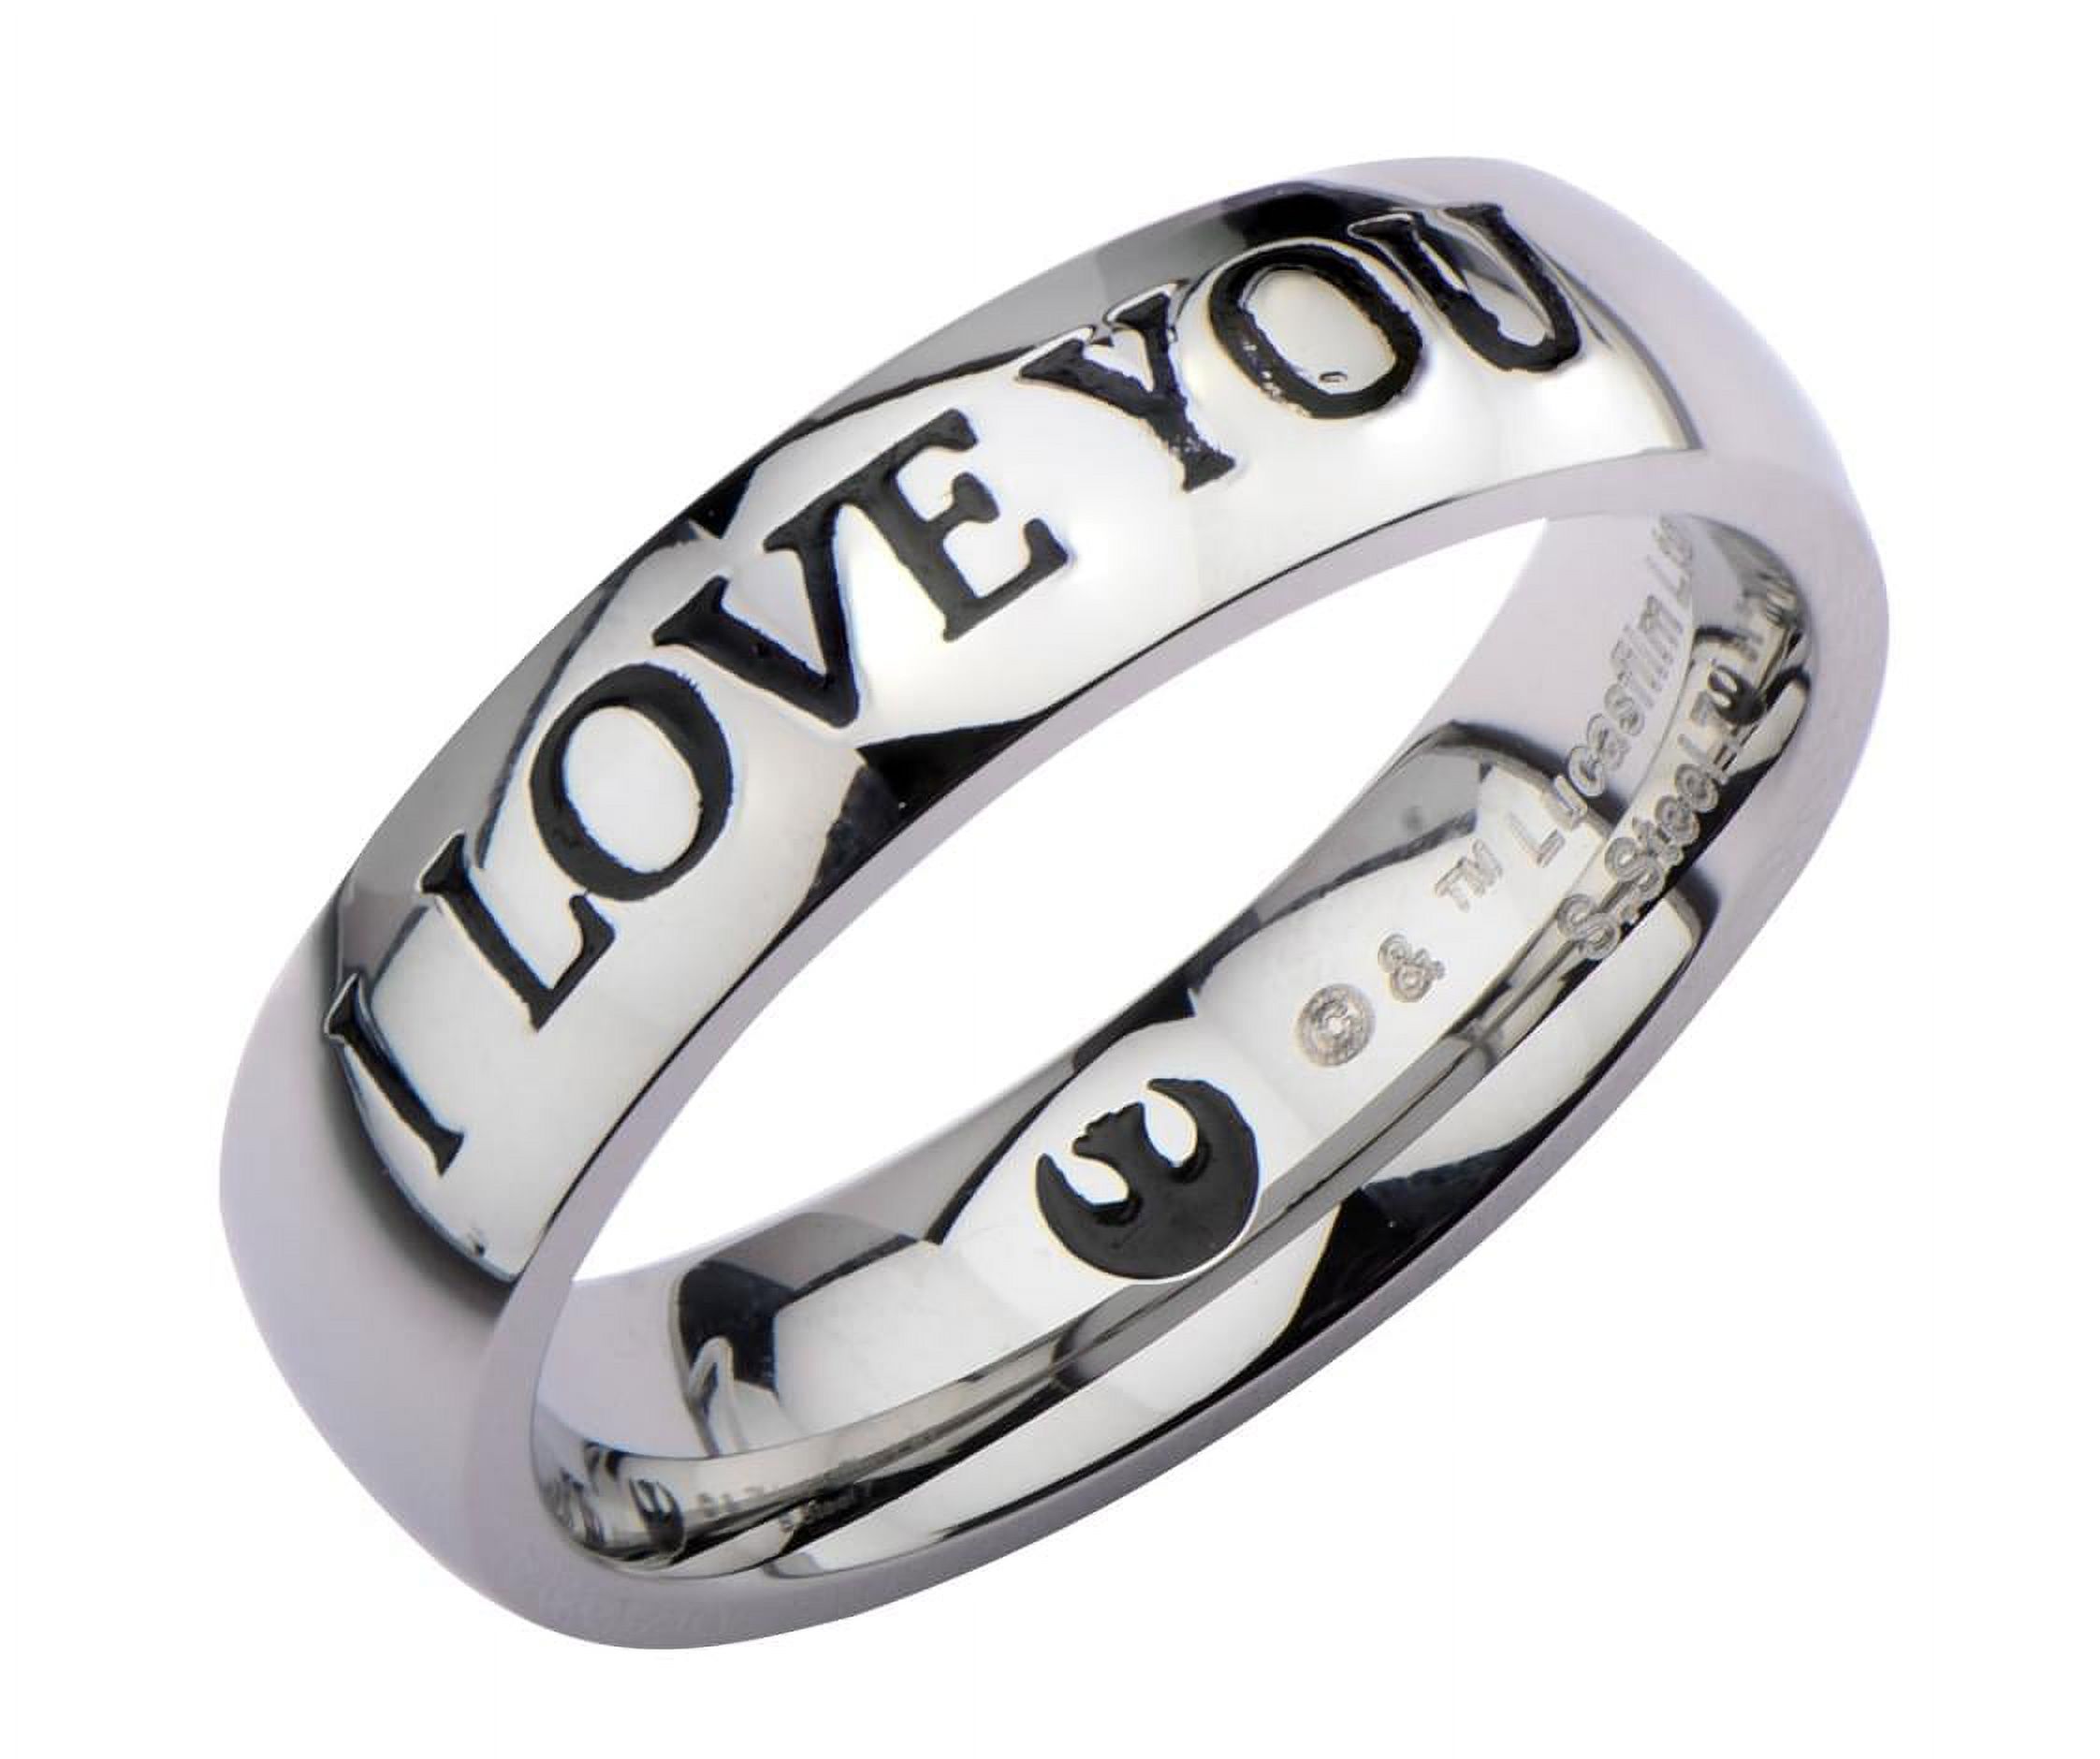 Star Wars I Love You Stainless Steel Unisex Ring | Size 6 - image 2 of 3